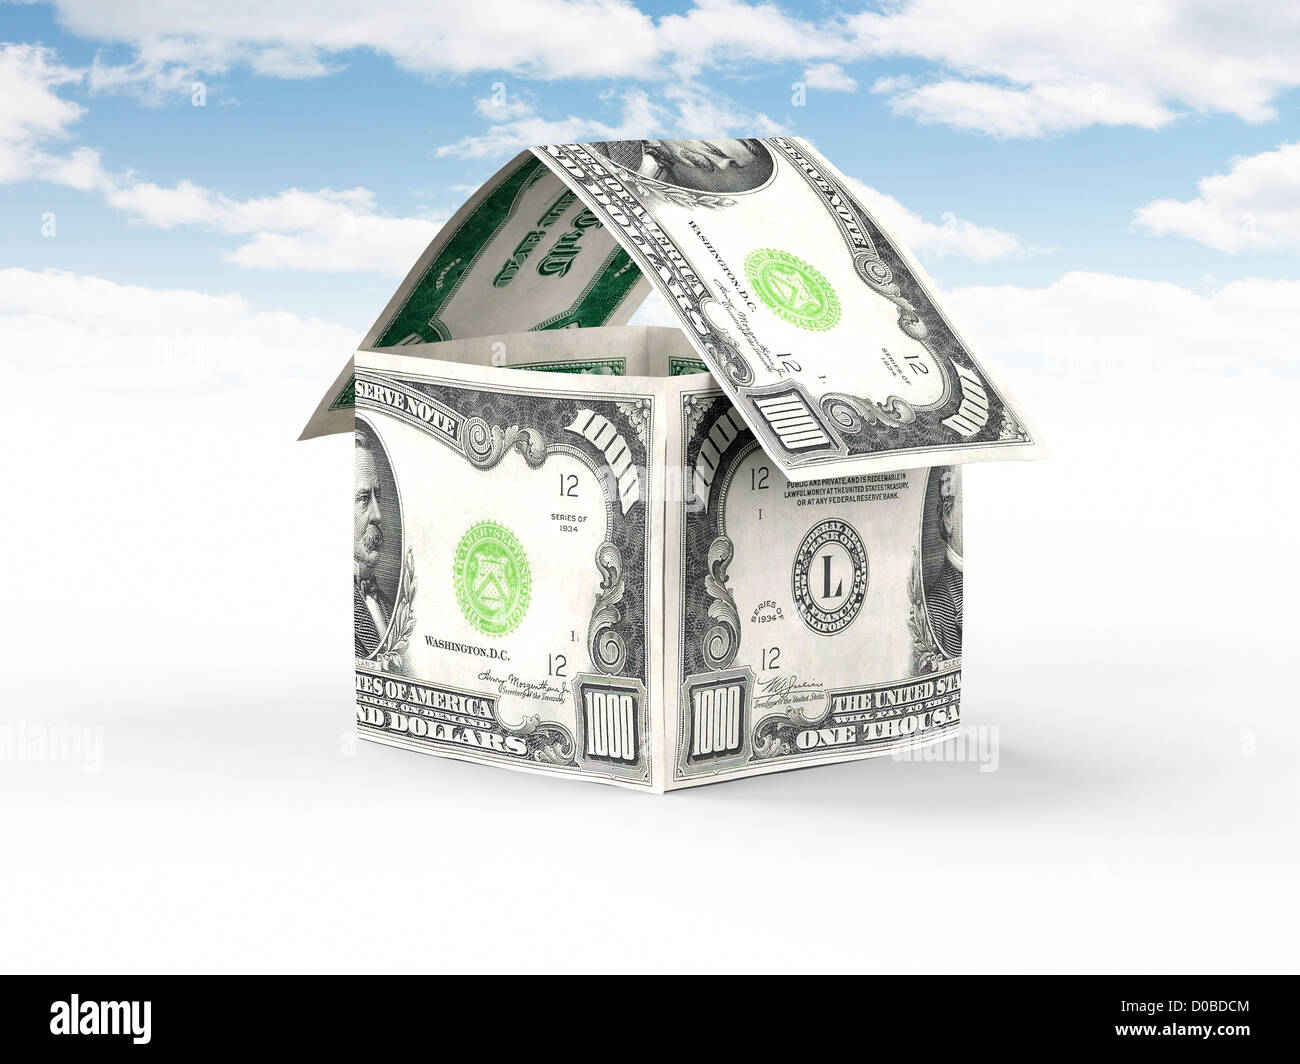 House made of money, thousand US dollar bills standing under blue sky isolated on white background Property, real estate concept Stock Photo